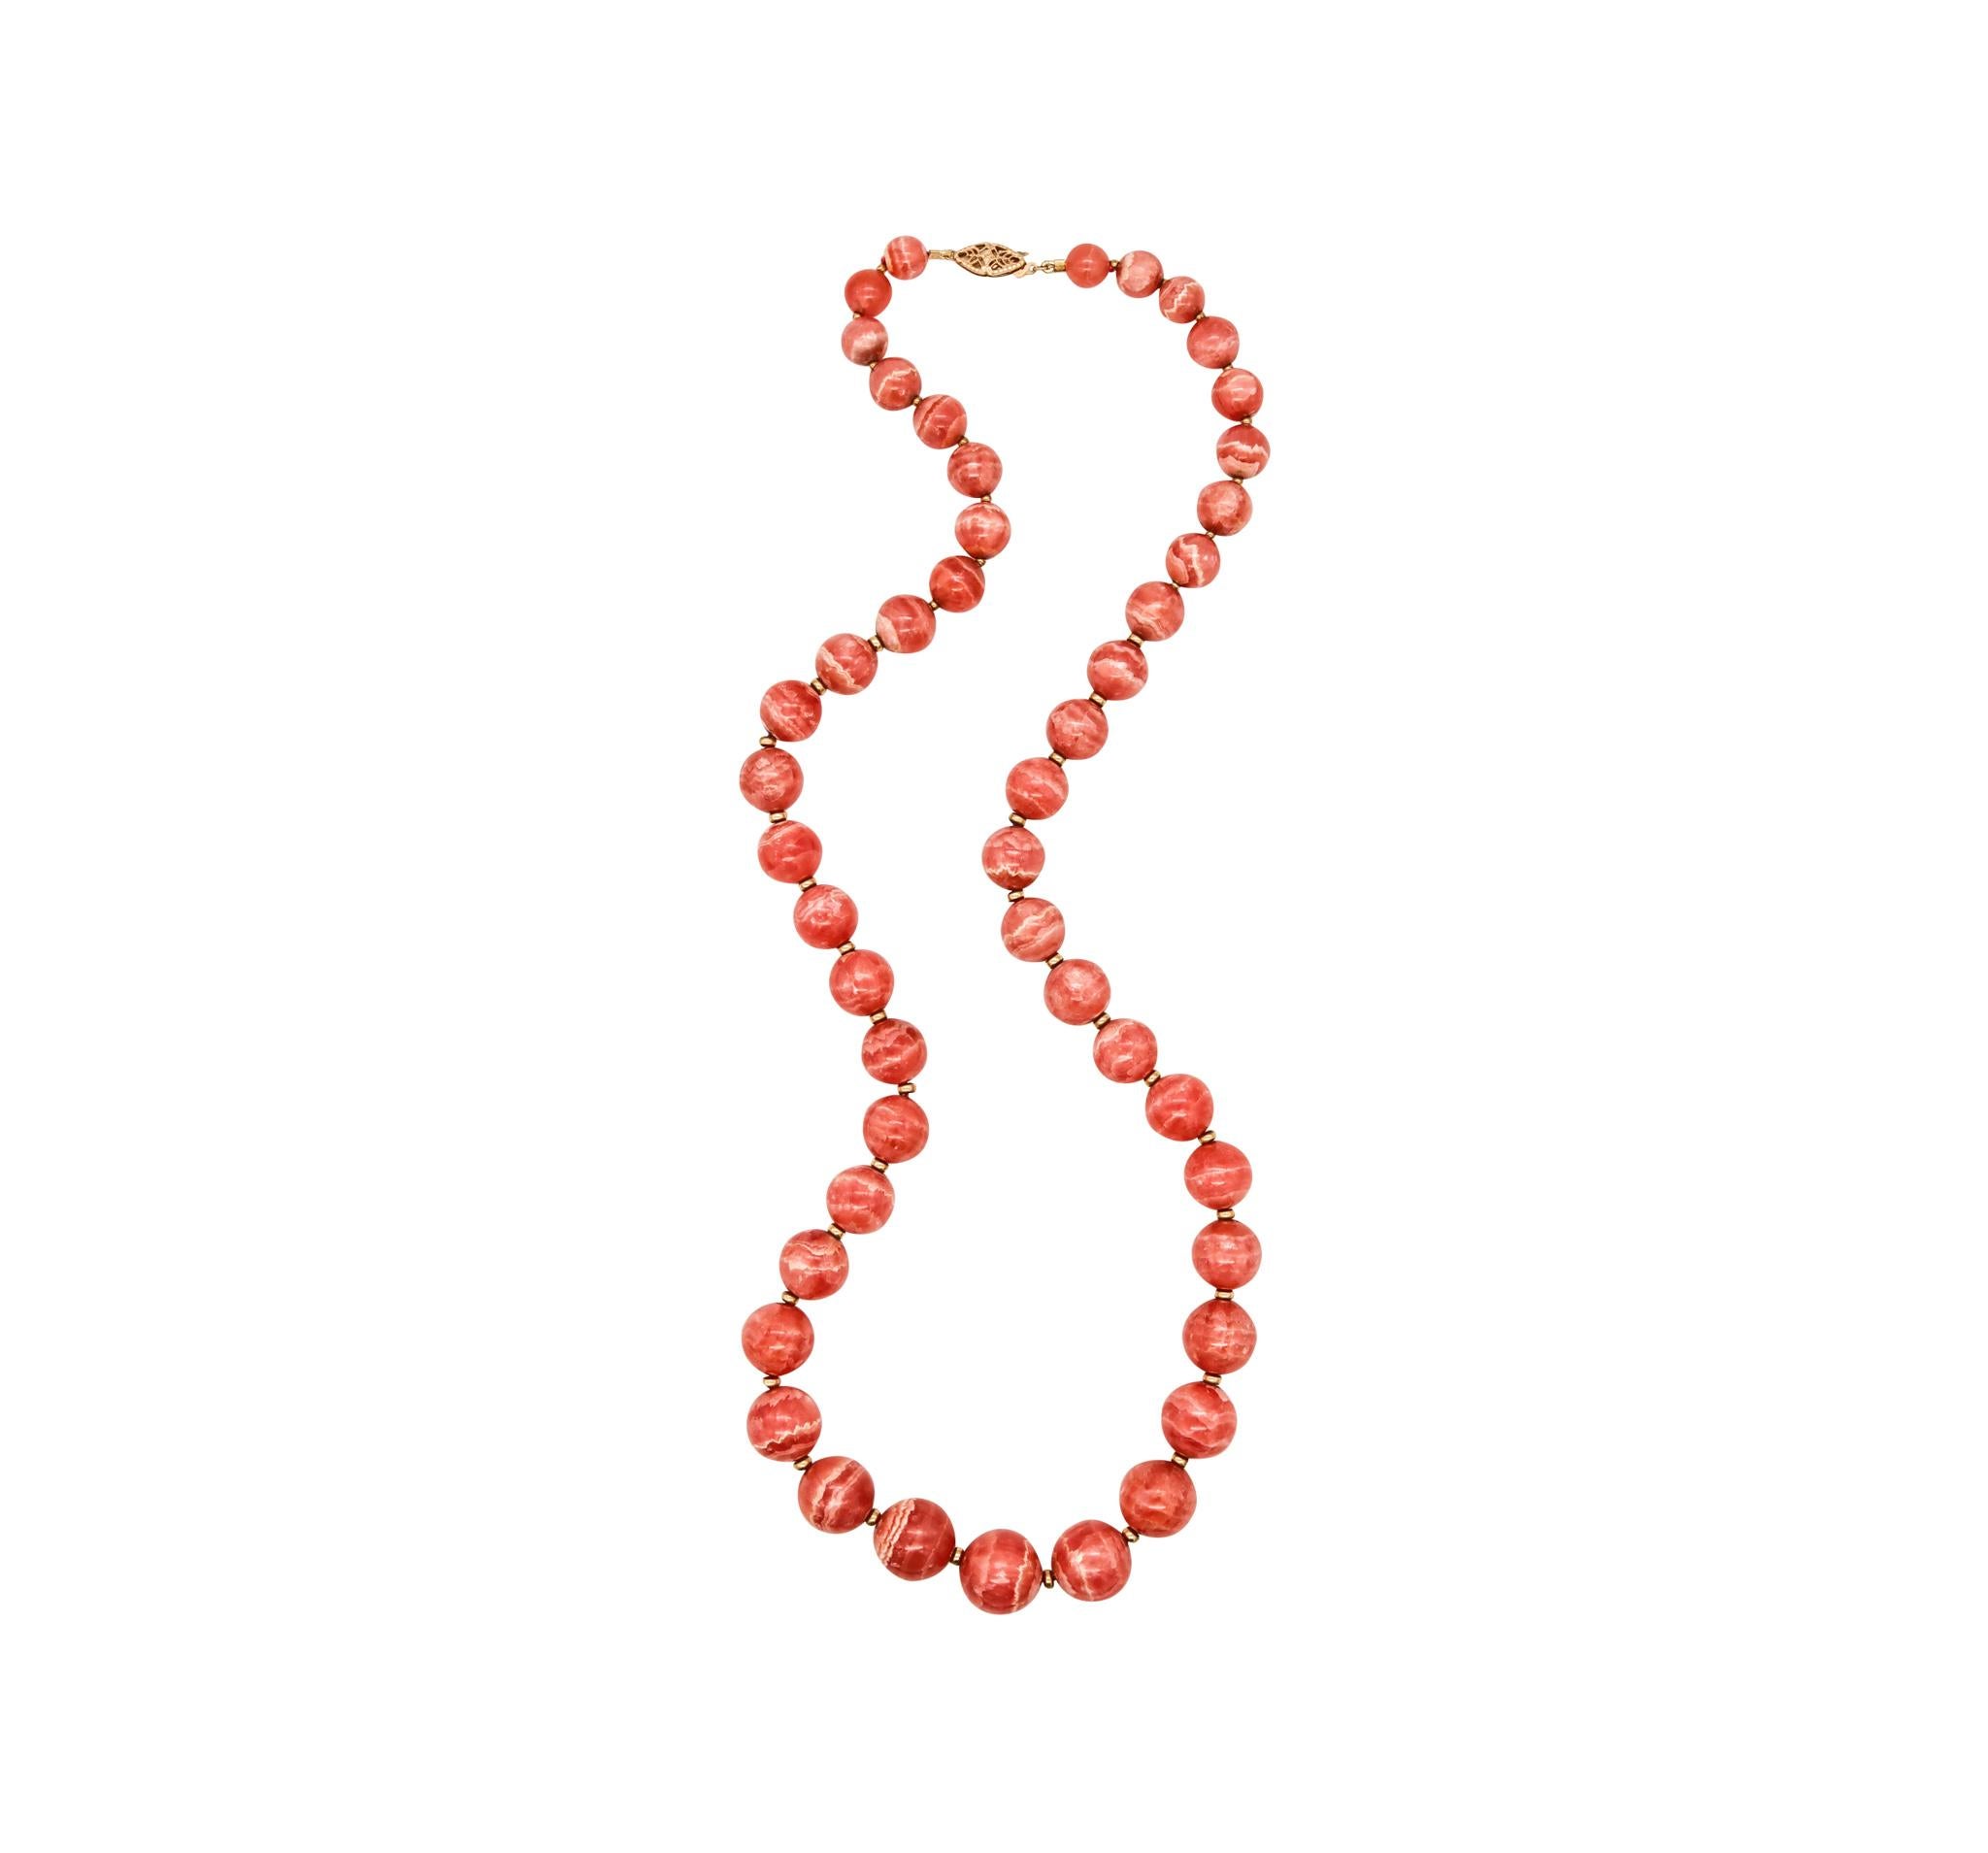 Magnificent necklace with Gradated Rhodochrosite.

Stunning sleek piece created, with super gem quality of gradated Rhodochrosite (8 mm to 15 mm). This necklace is composed by 48 spheres, perfectly carved from natural Argentinian reddish pink